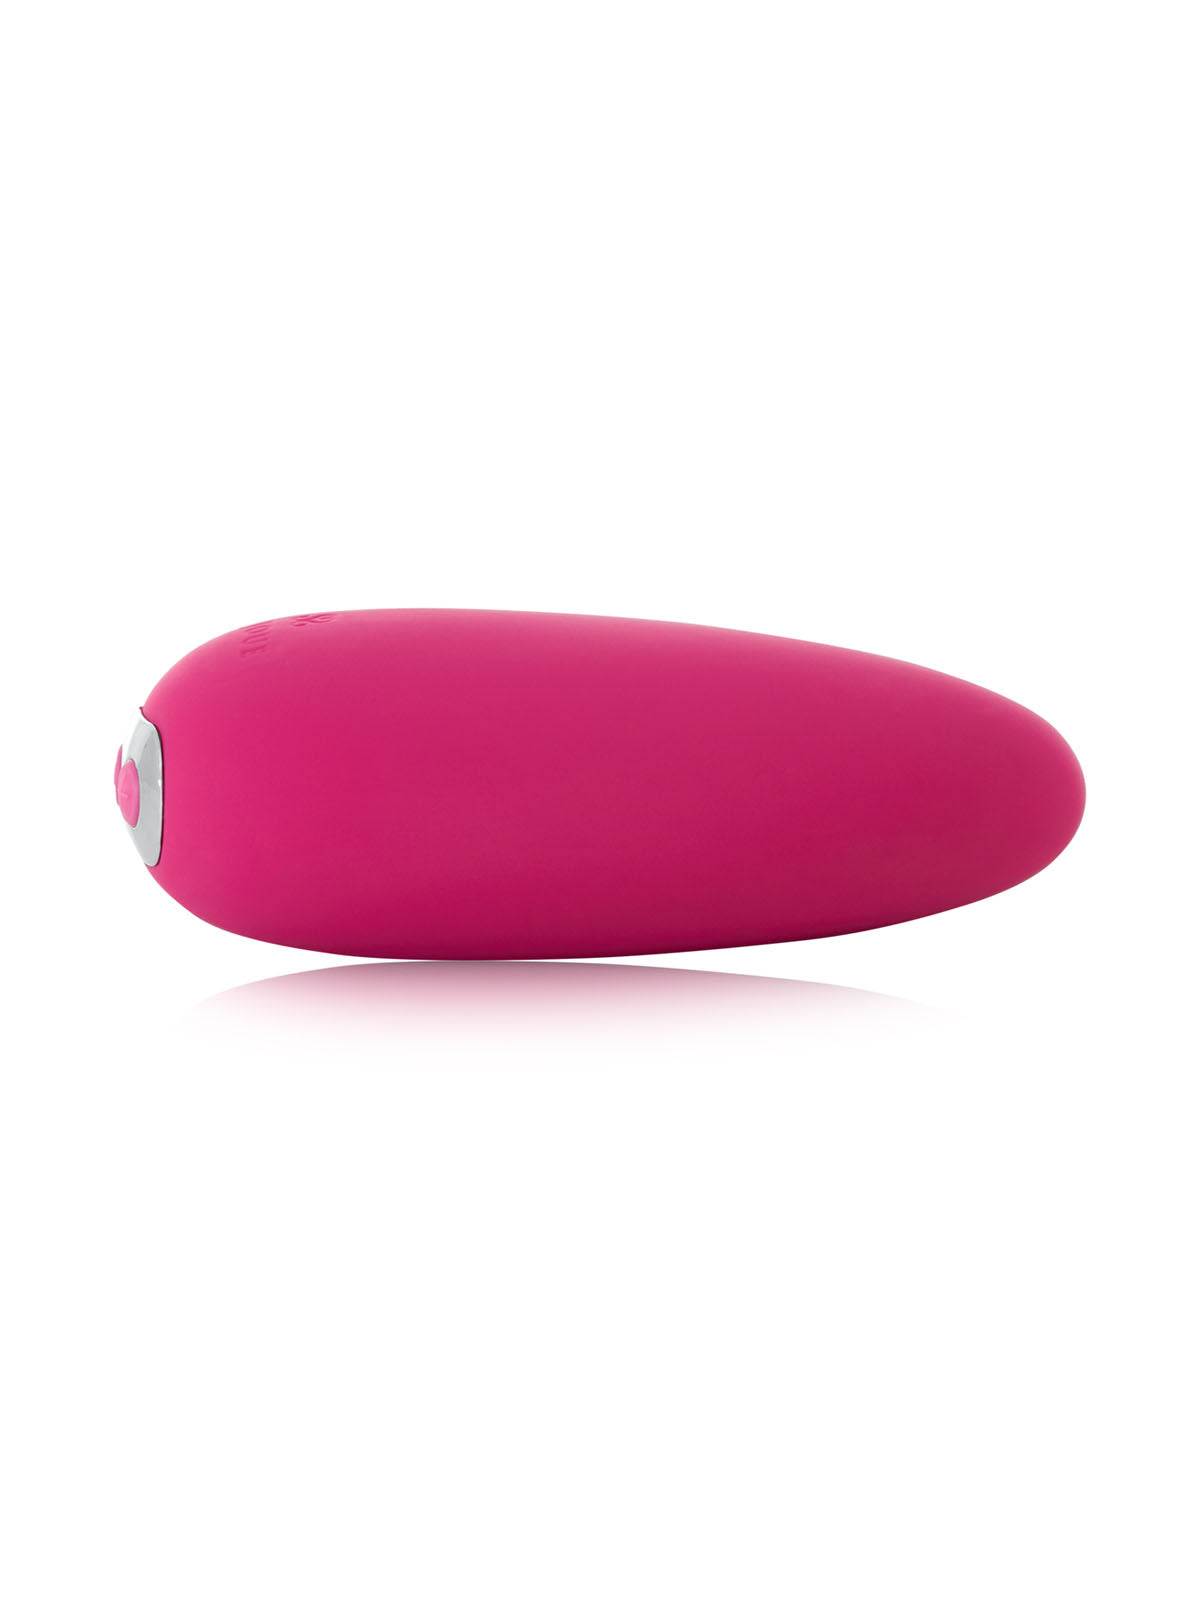 Mimi Soft Clitoral Vibrator Side by JeJoue